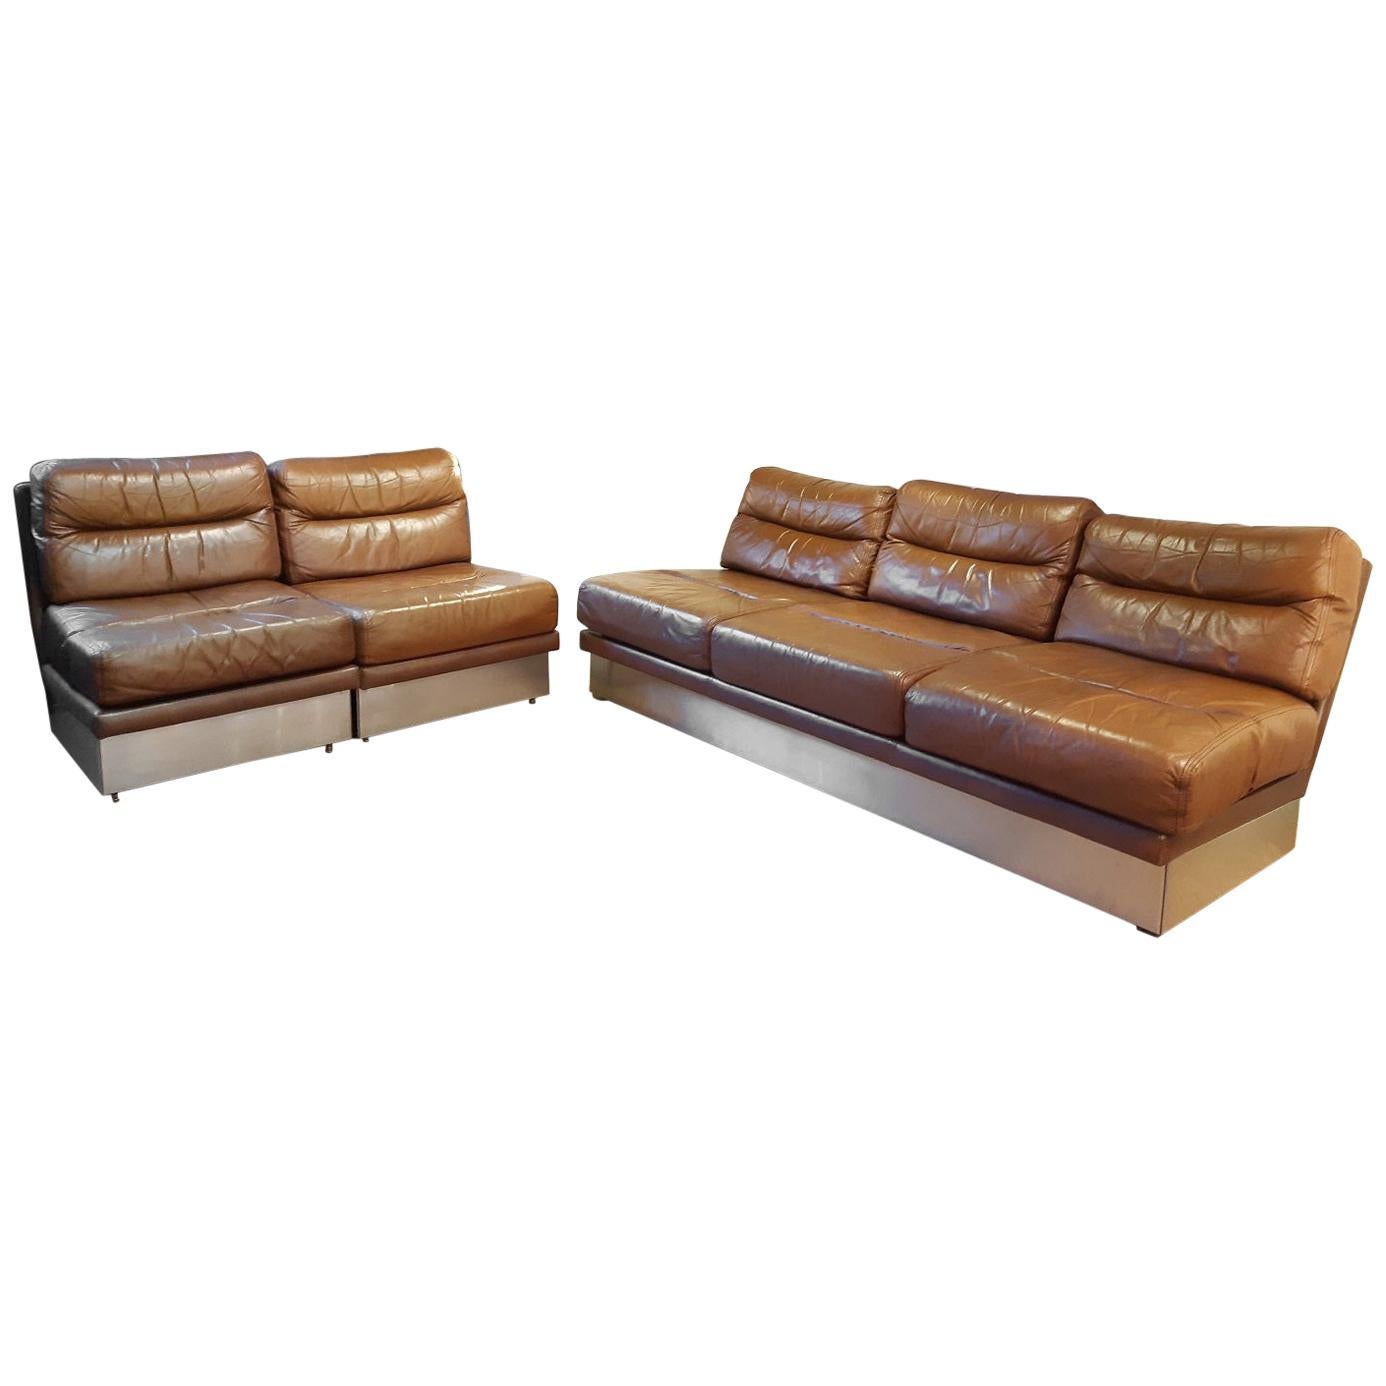 Jacques Charpentier Leather Lounge Sofa and Chairs 1970 France Roche Bobois